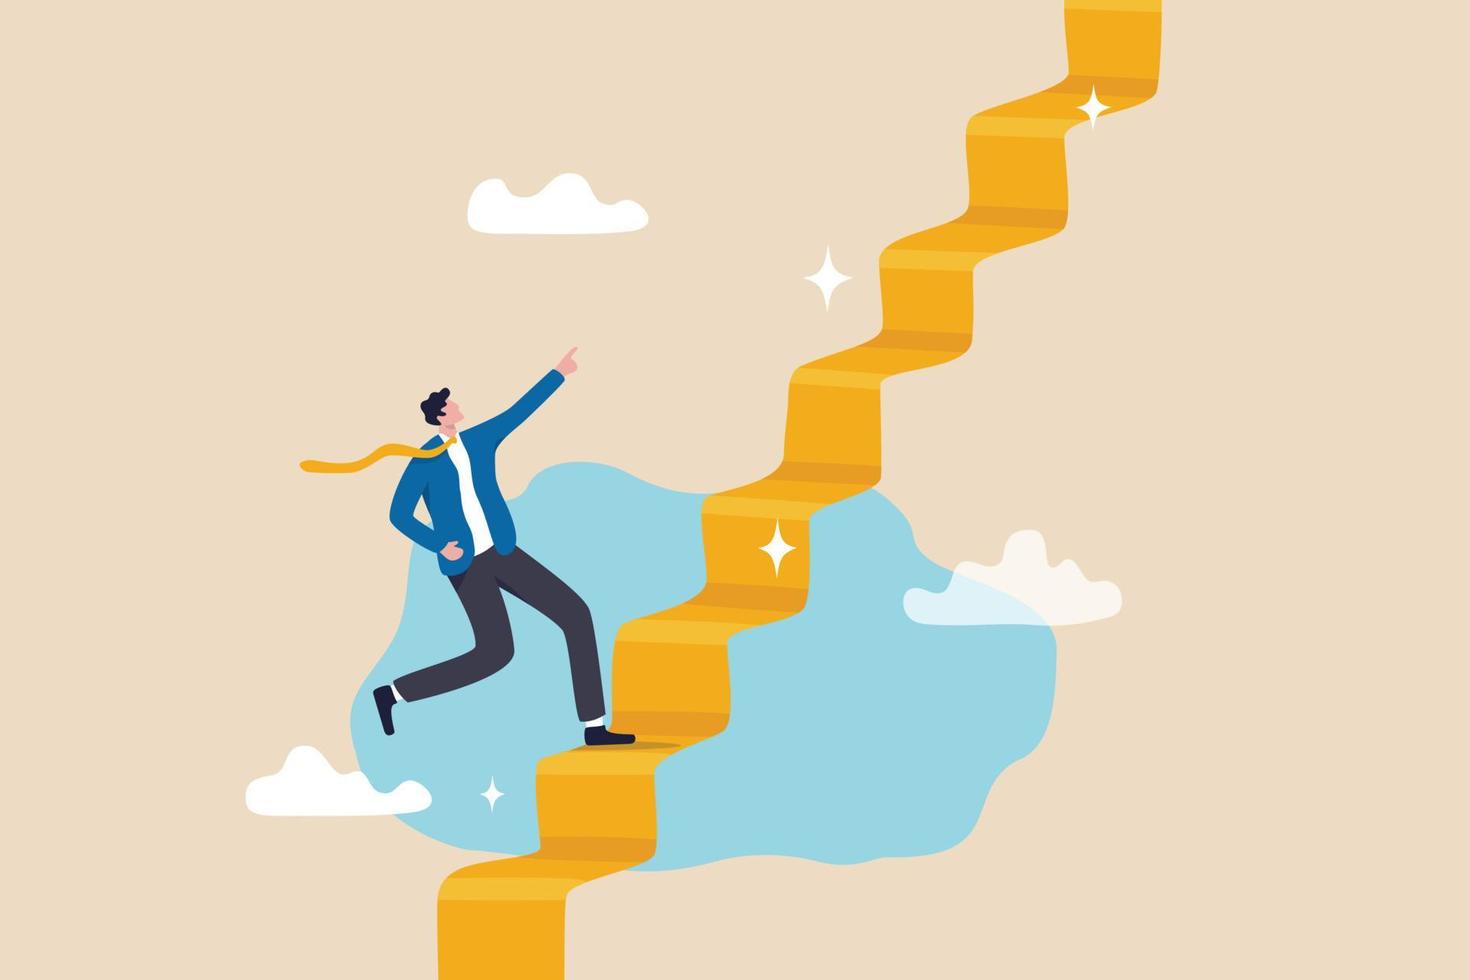 Ladder of success, stair way to succeed and reach business target, growth or growing career path, motivation and challenge to success opportunity concept, businessman climb up stair way to success. vector